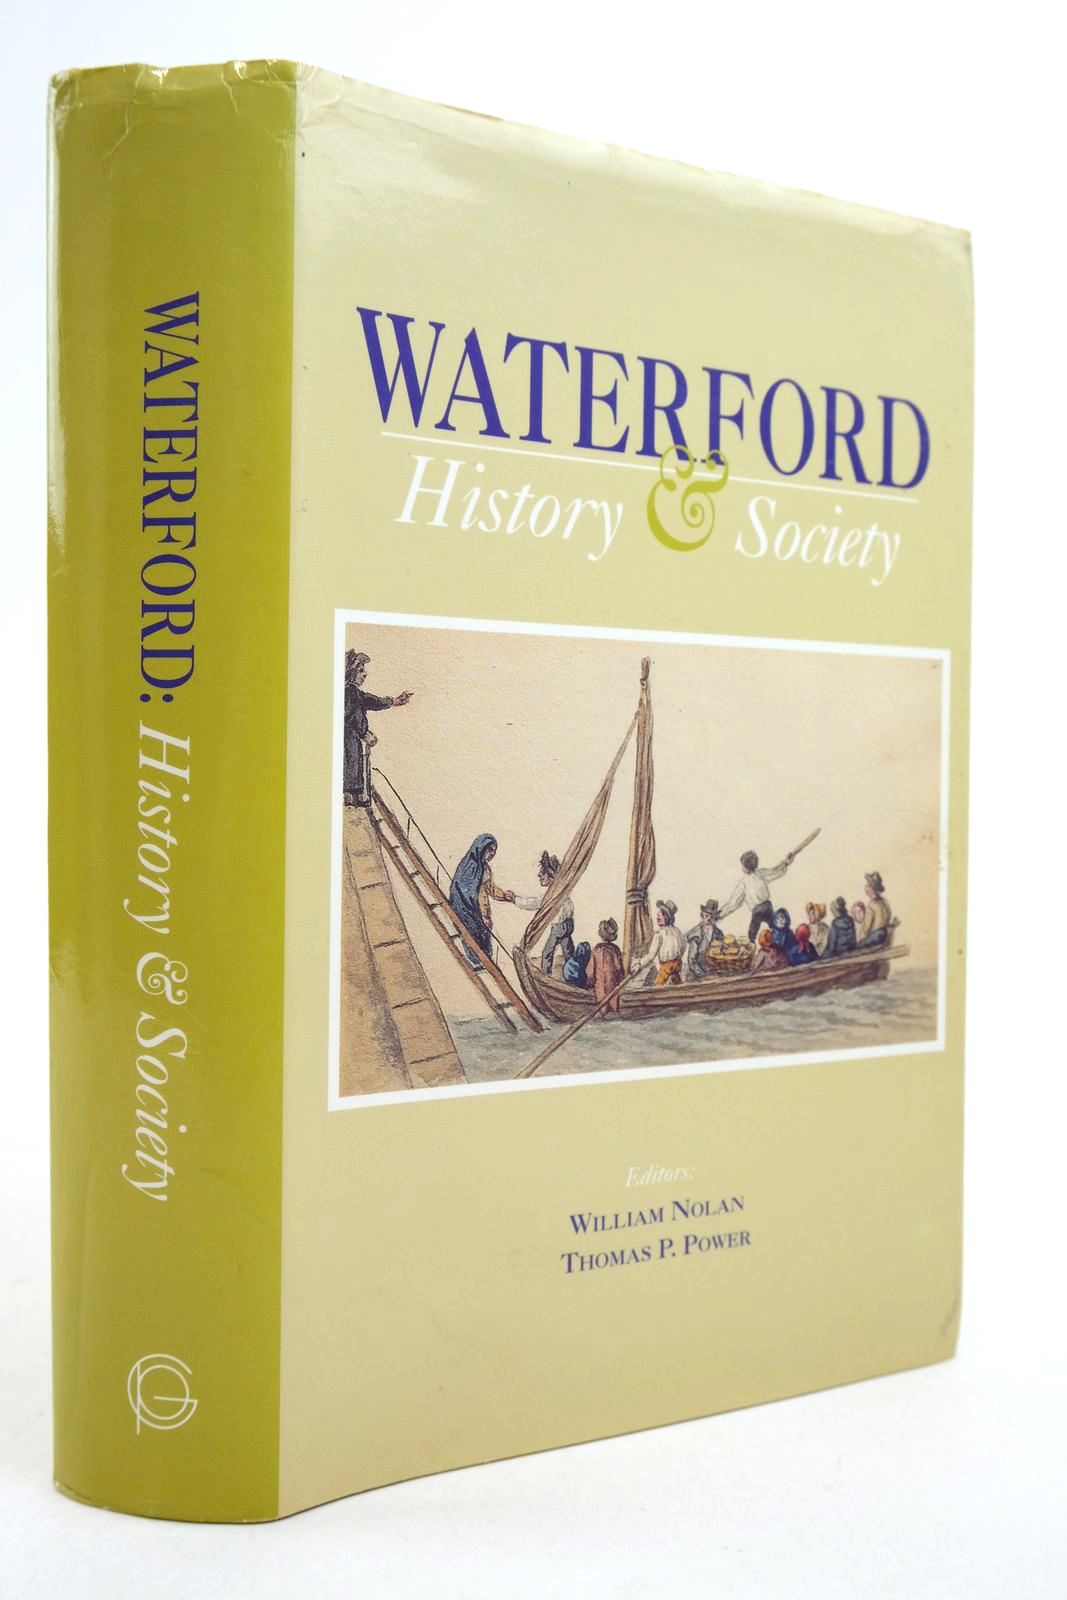 Photo of WATERFORD: HISTORY & SOCIETY written by Nolan, William
Power, Timothy P.
Cowman, Des published by Geography Publications (STOCK CODE: 2140607)  for sale by Stella & Rose's Books